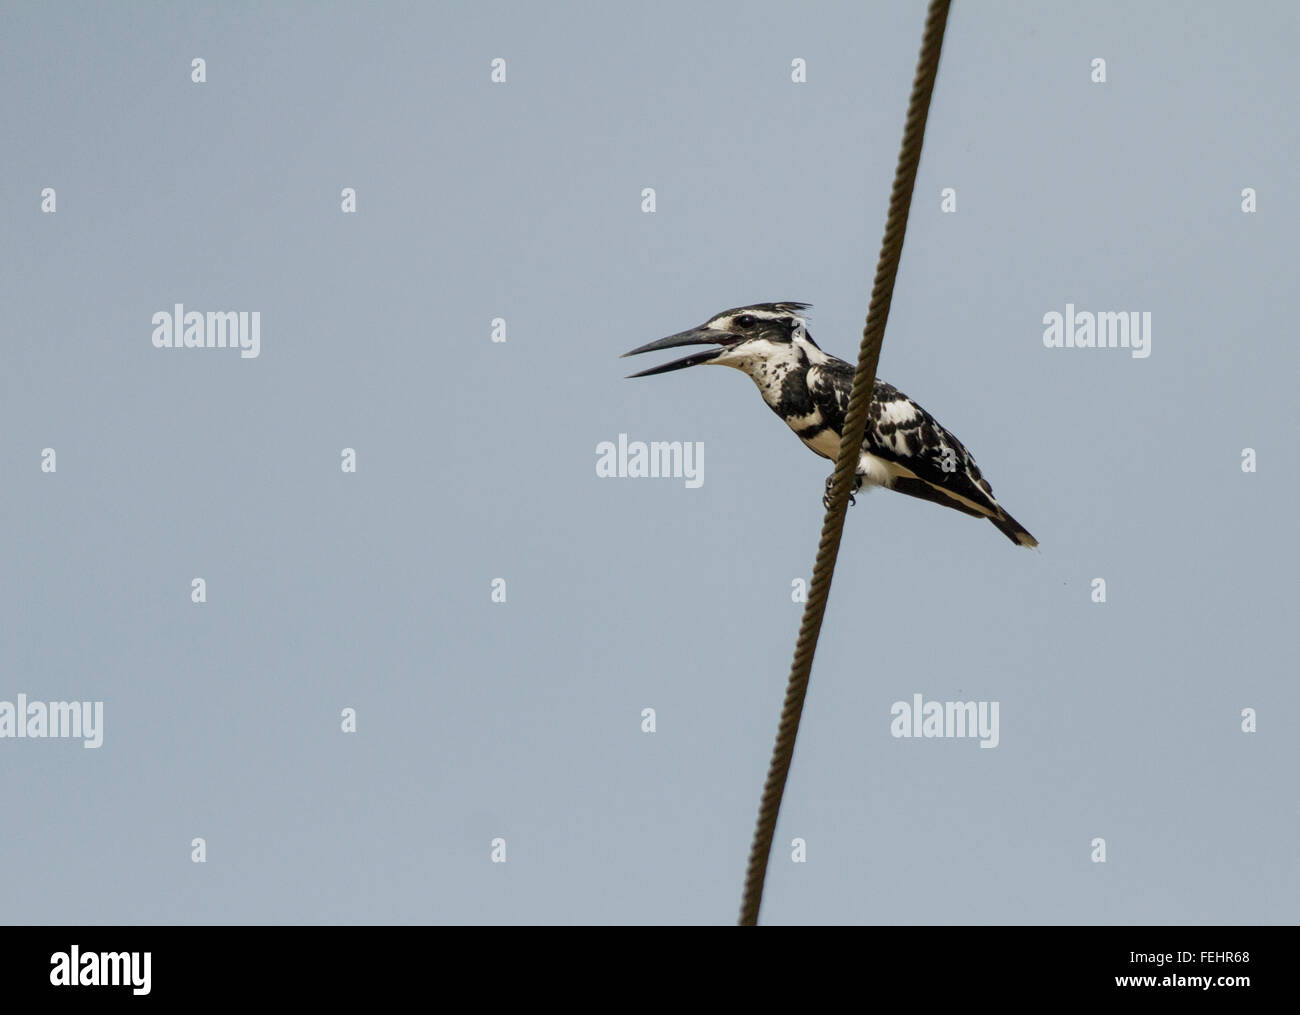 The pied kingfisher (Ceryle rudis) is a water kingfisher and is found widely distributed across Africa and Asia. Stock Photo